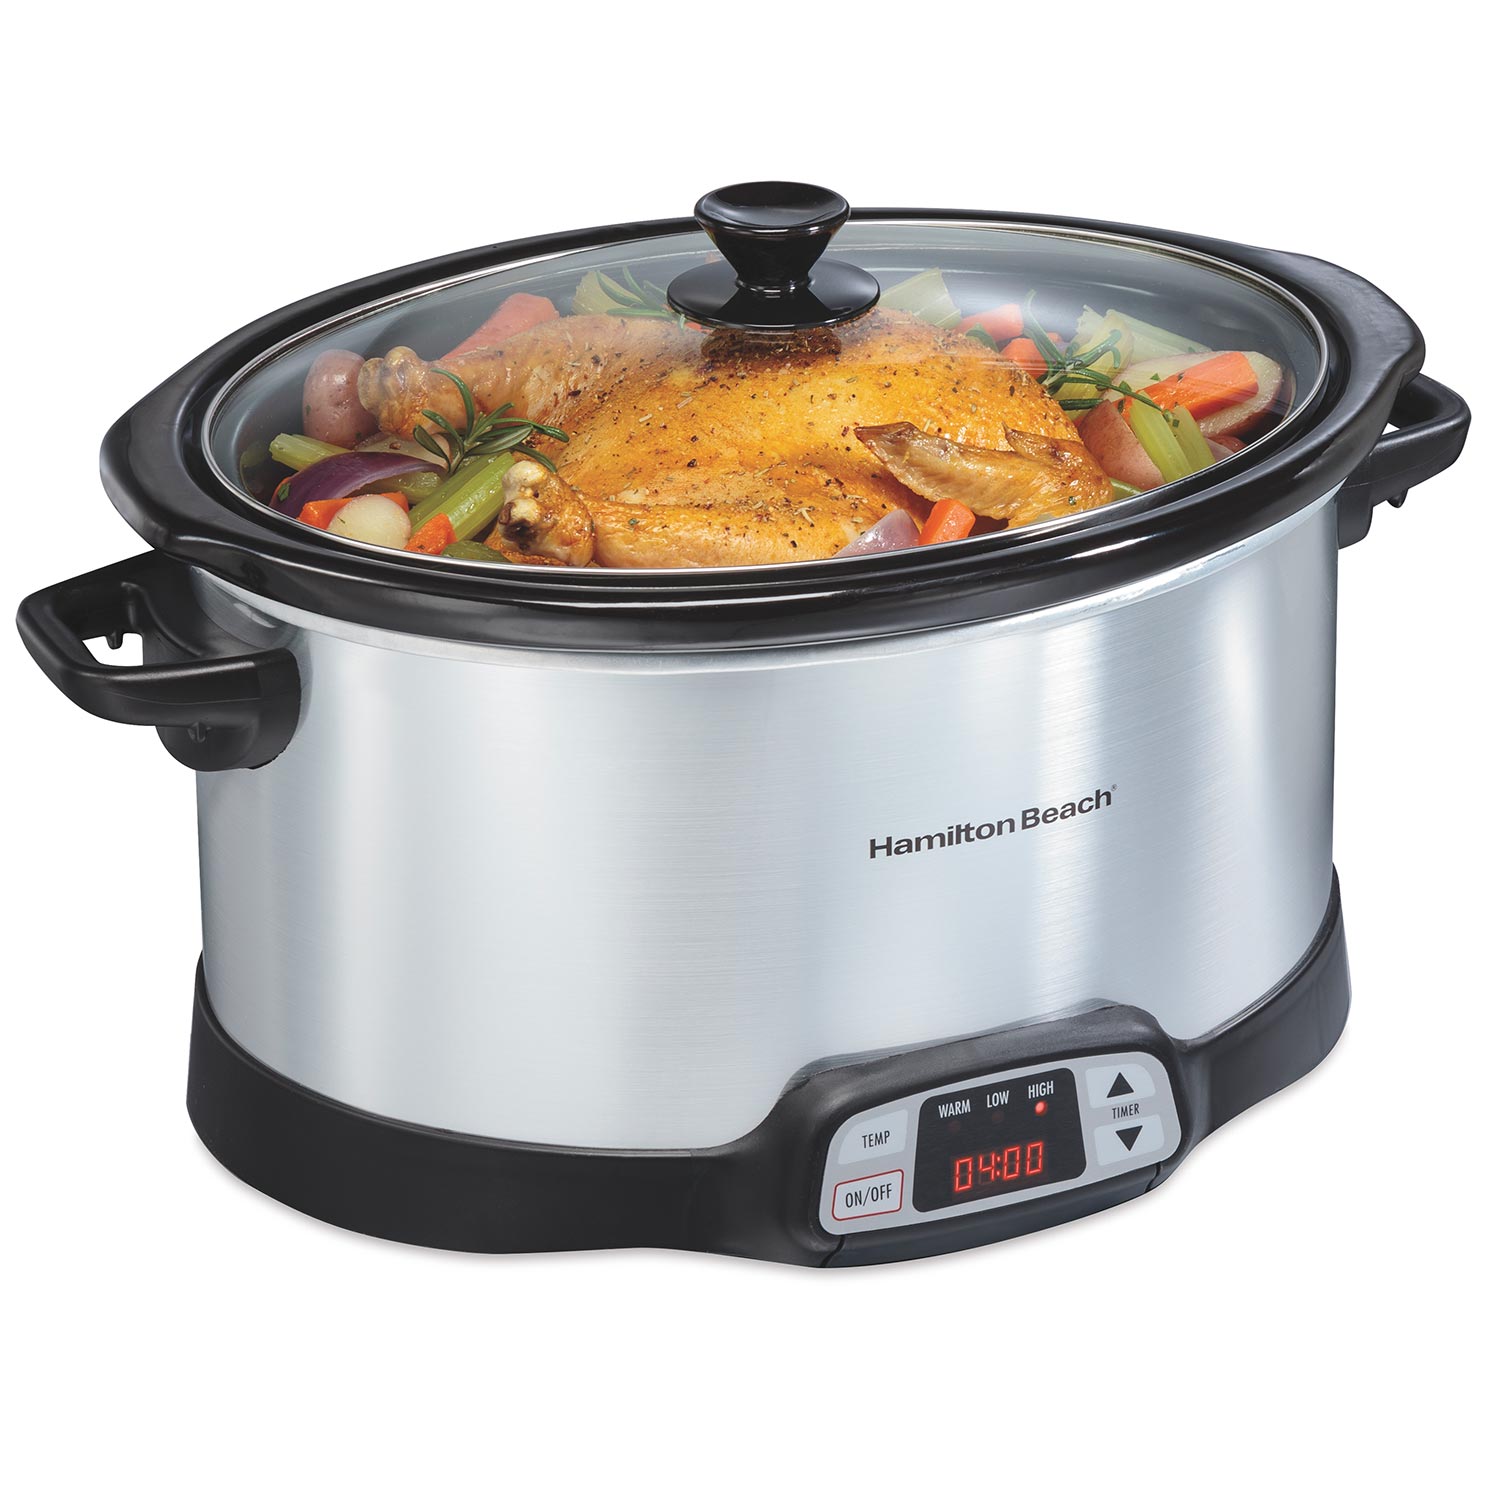 8 Quart Programmable Countdown Slow Cooker, Silver (33480)